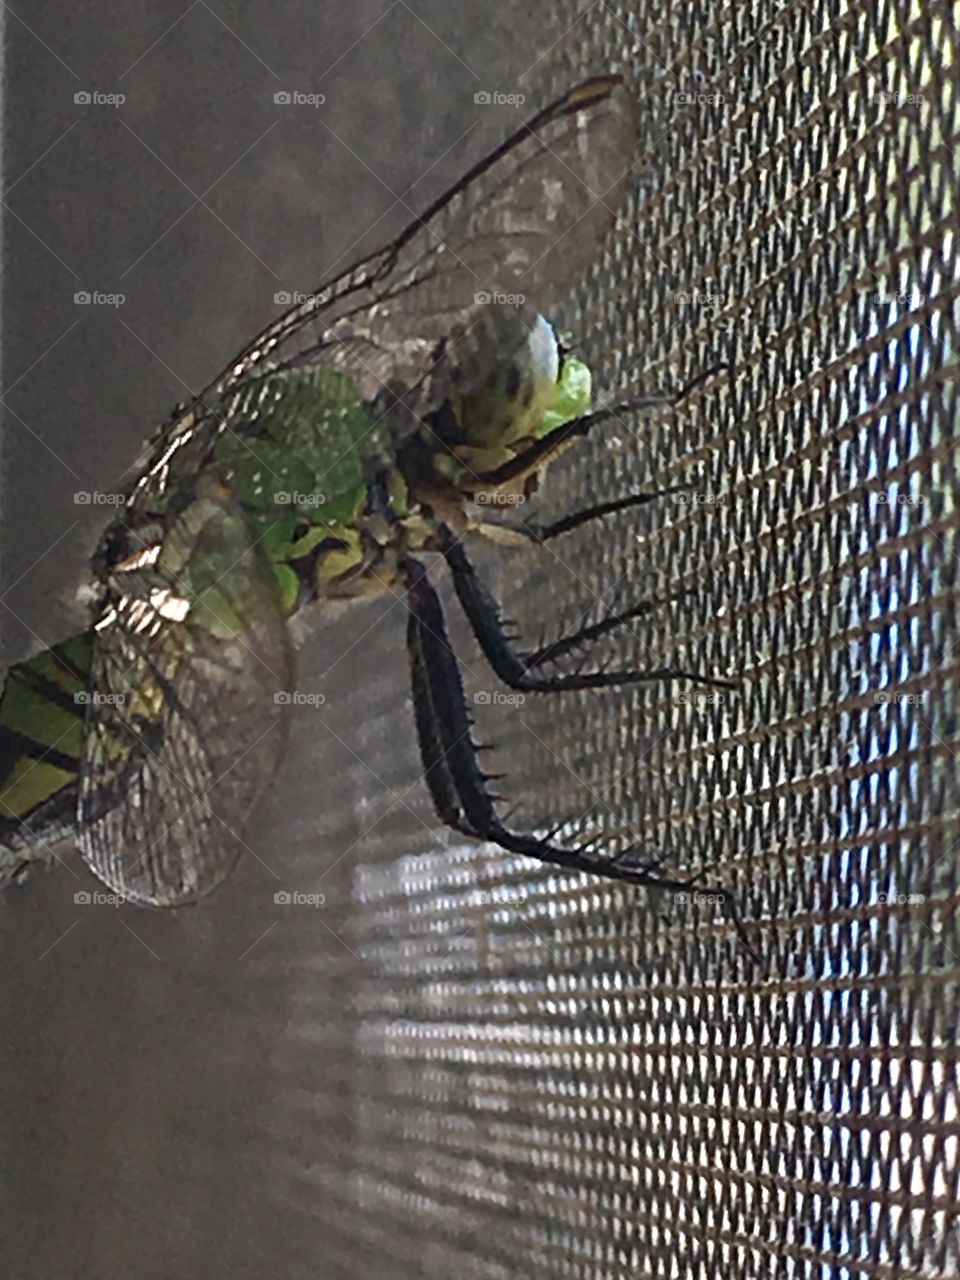 Up close with a dragonfly